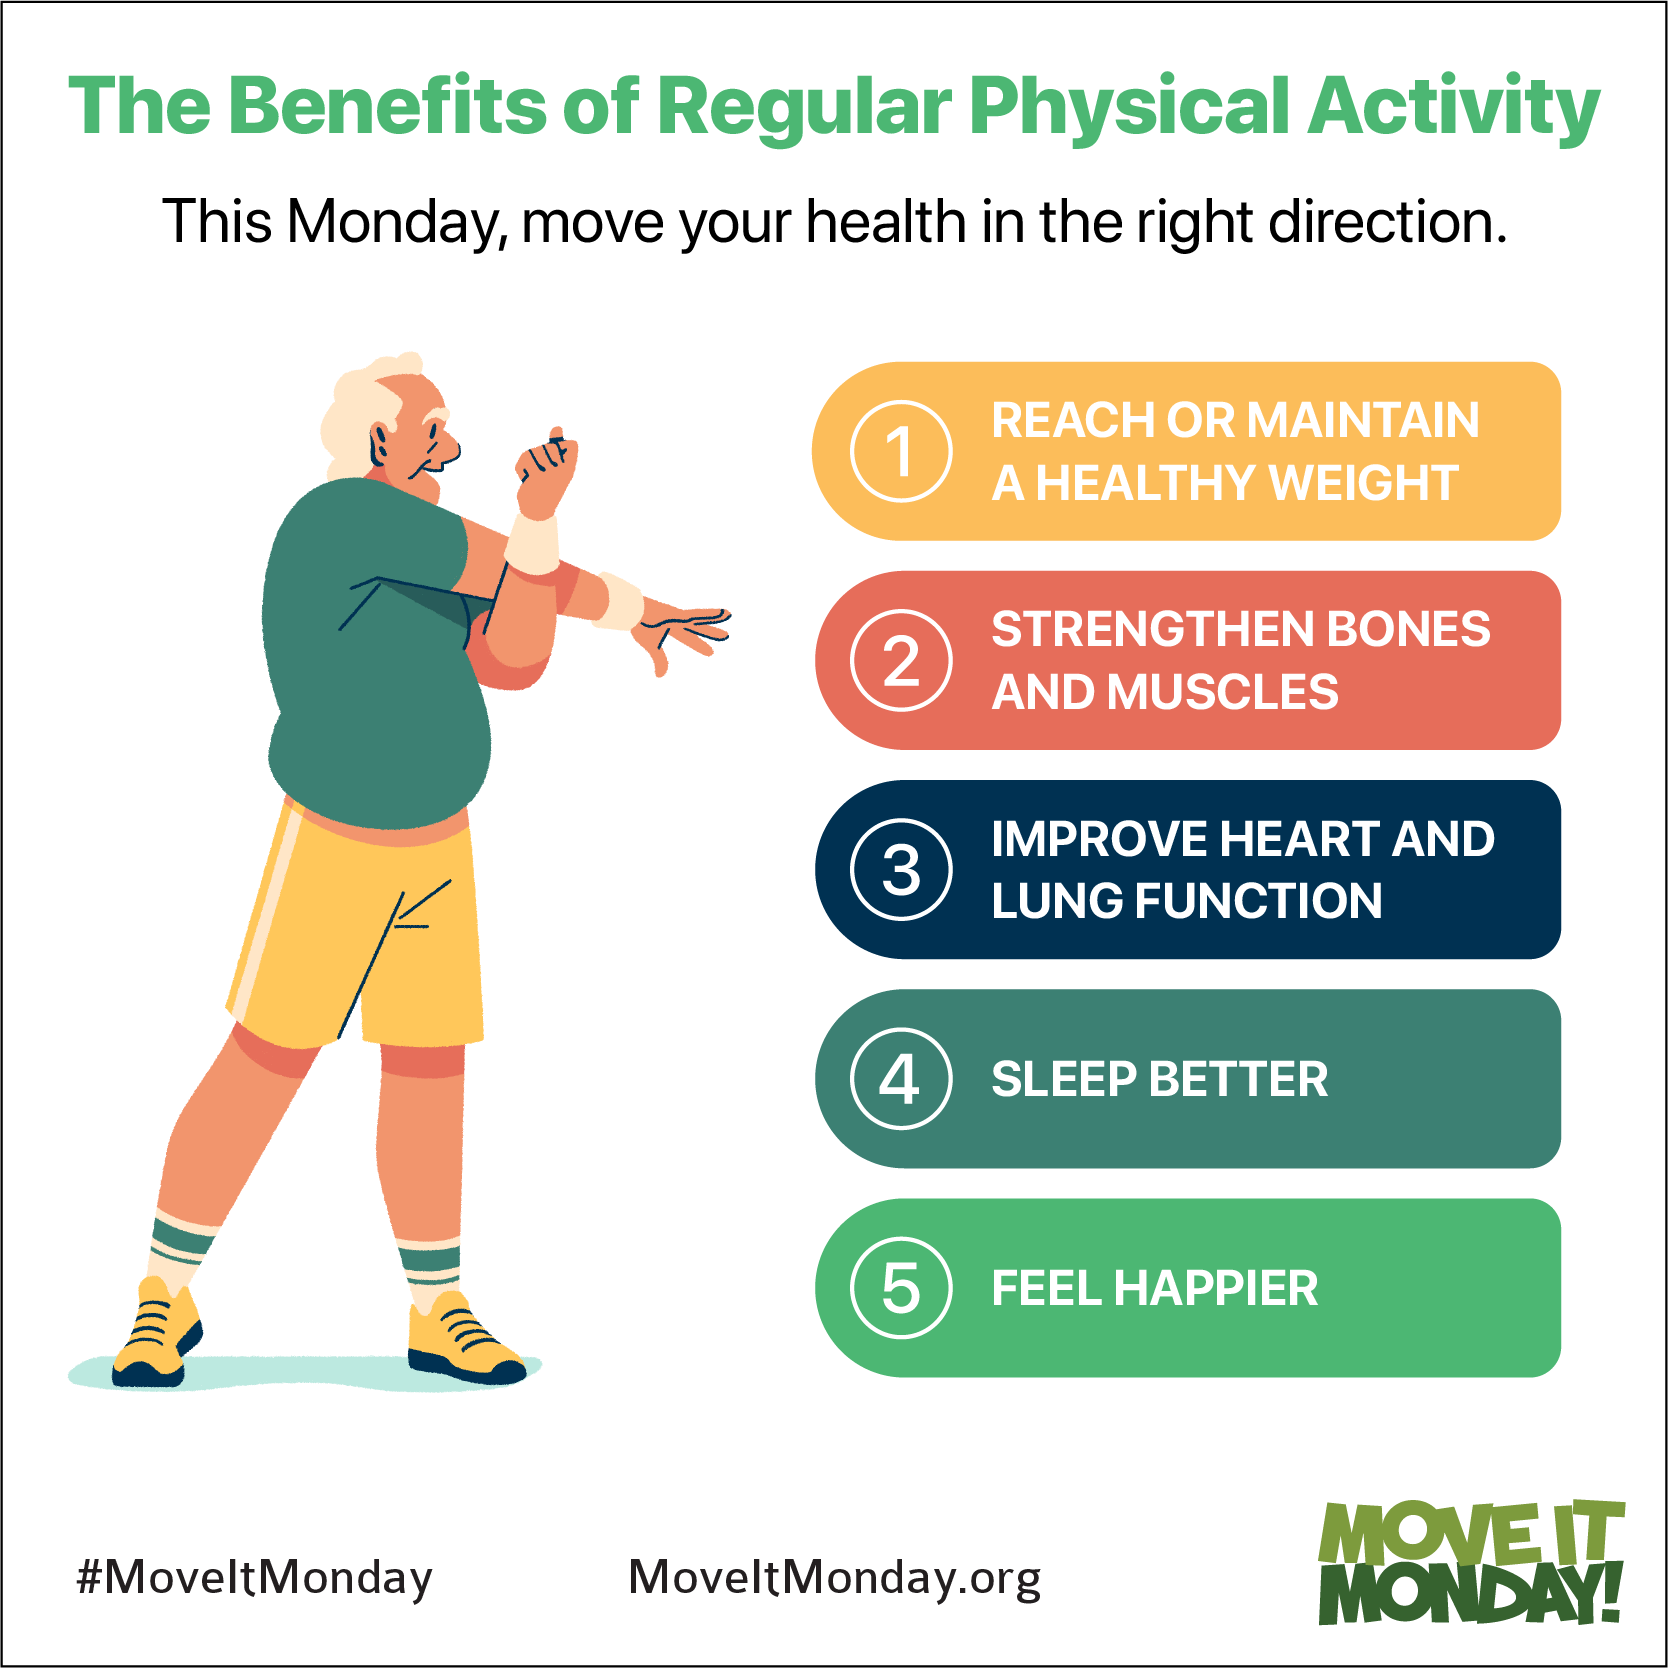 https://www.mondaycampaigns.org/wp-content/uploads/2021/04/move-it-monday-graphic-health-benefits-of-regular-exercise.png